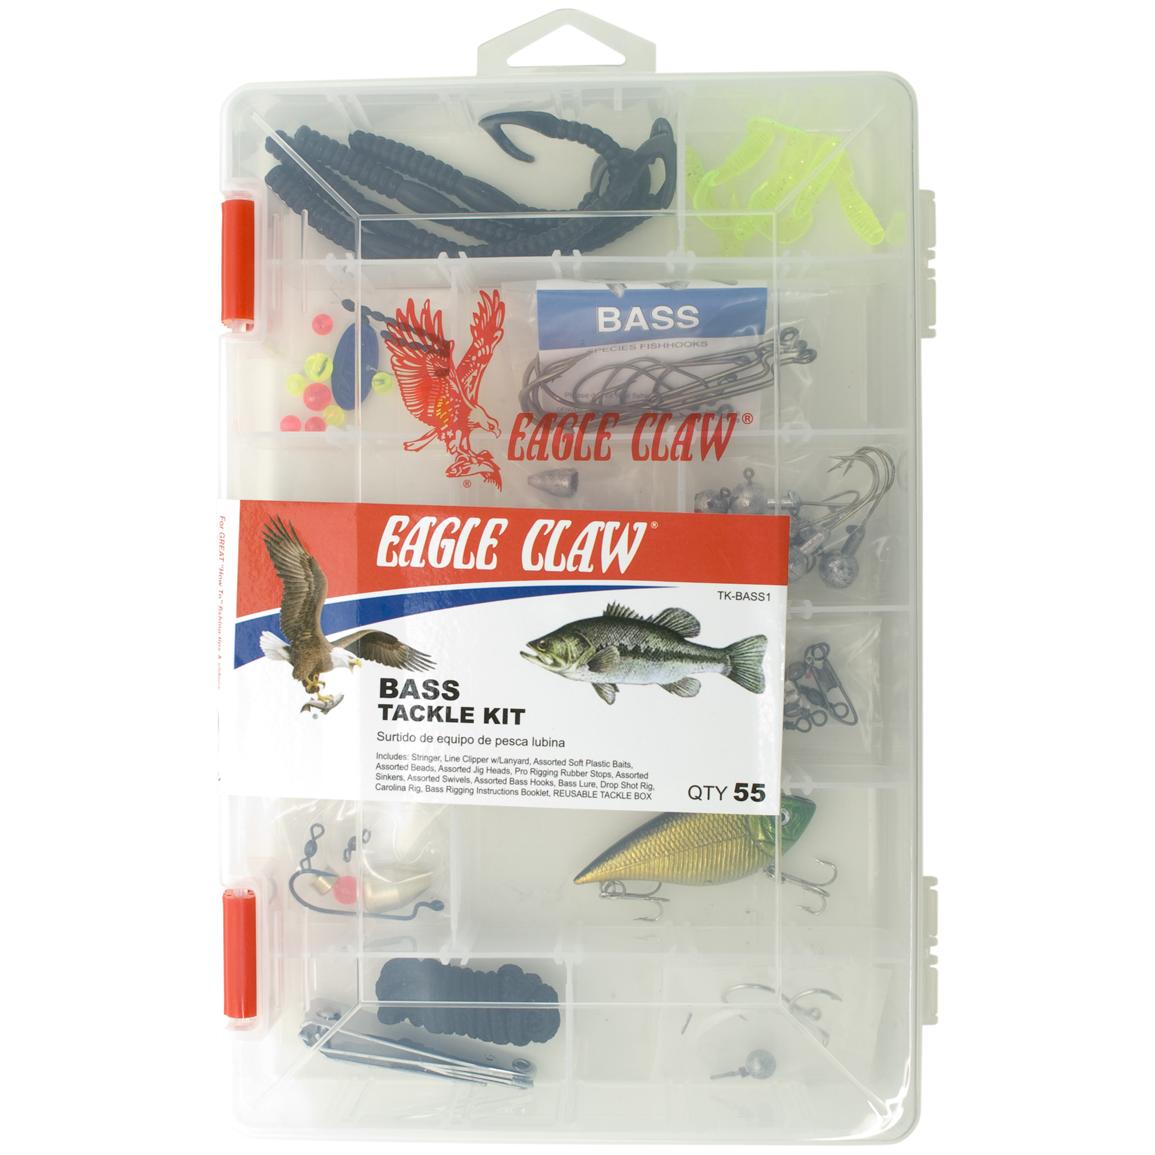 Eagle Claw Bass Fishing Tackle Kit